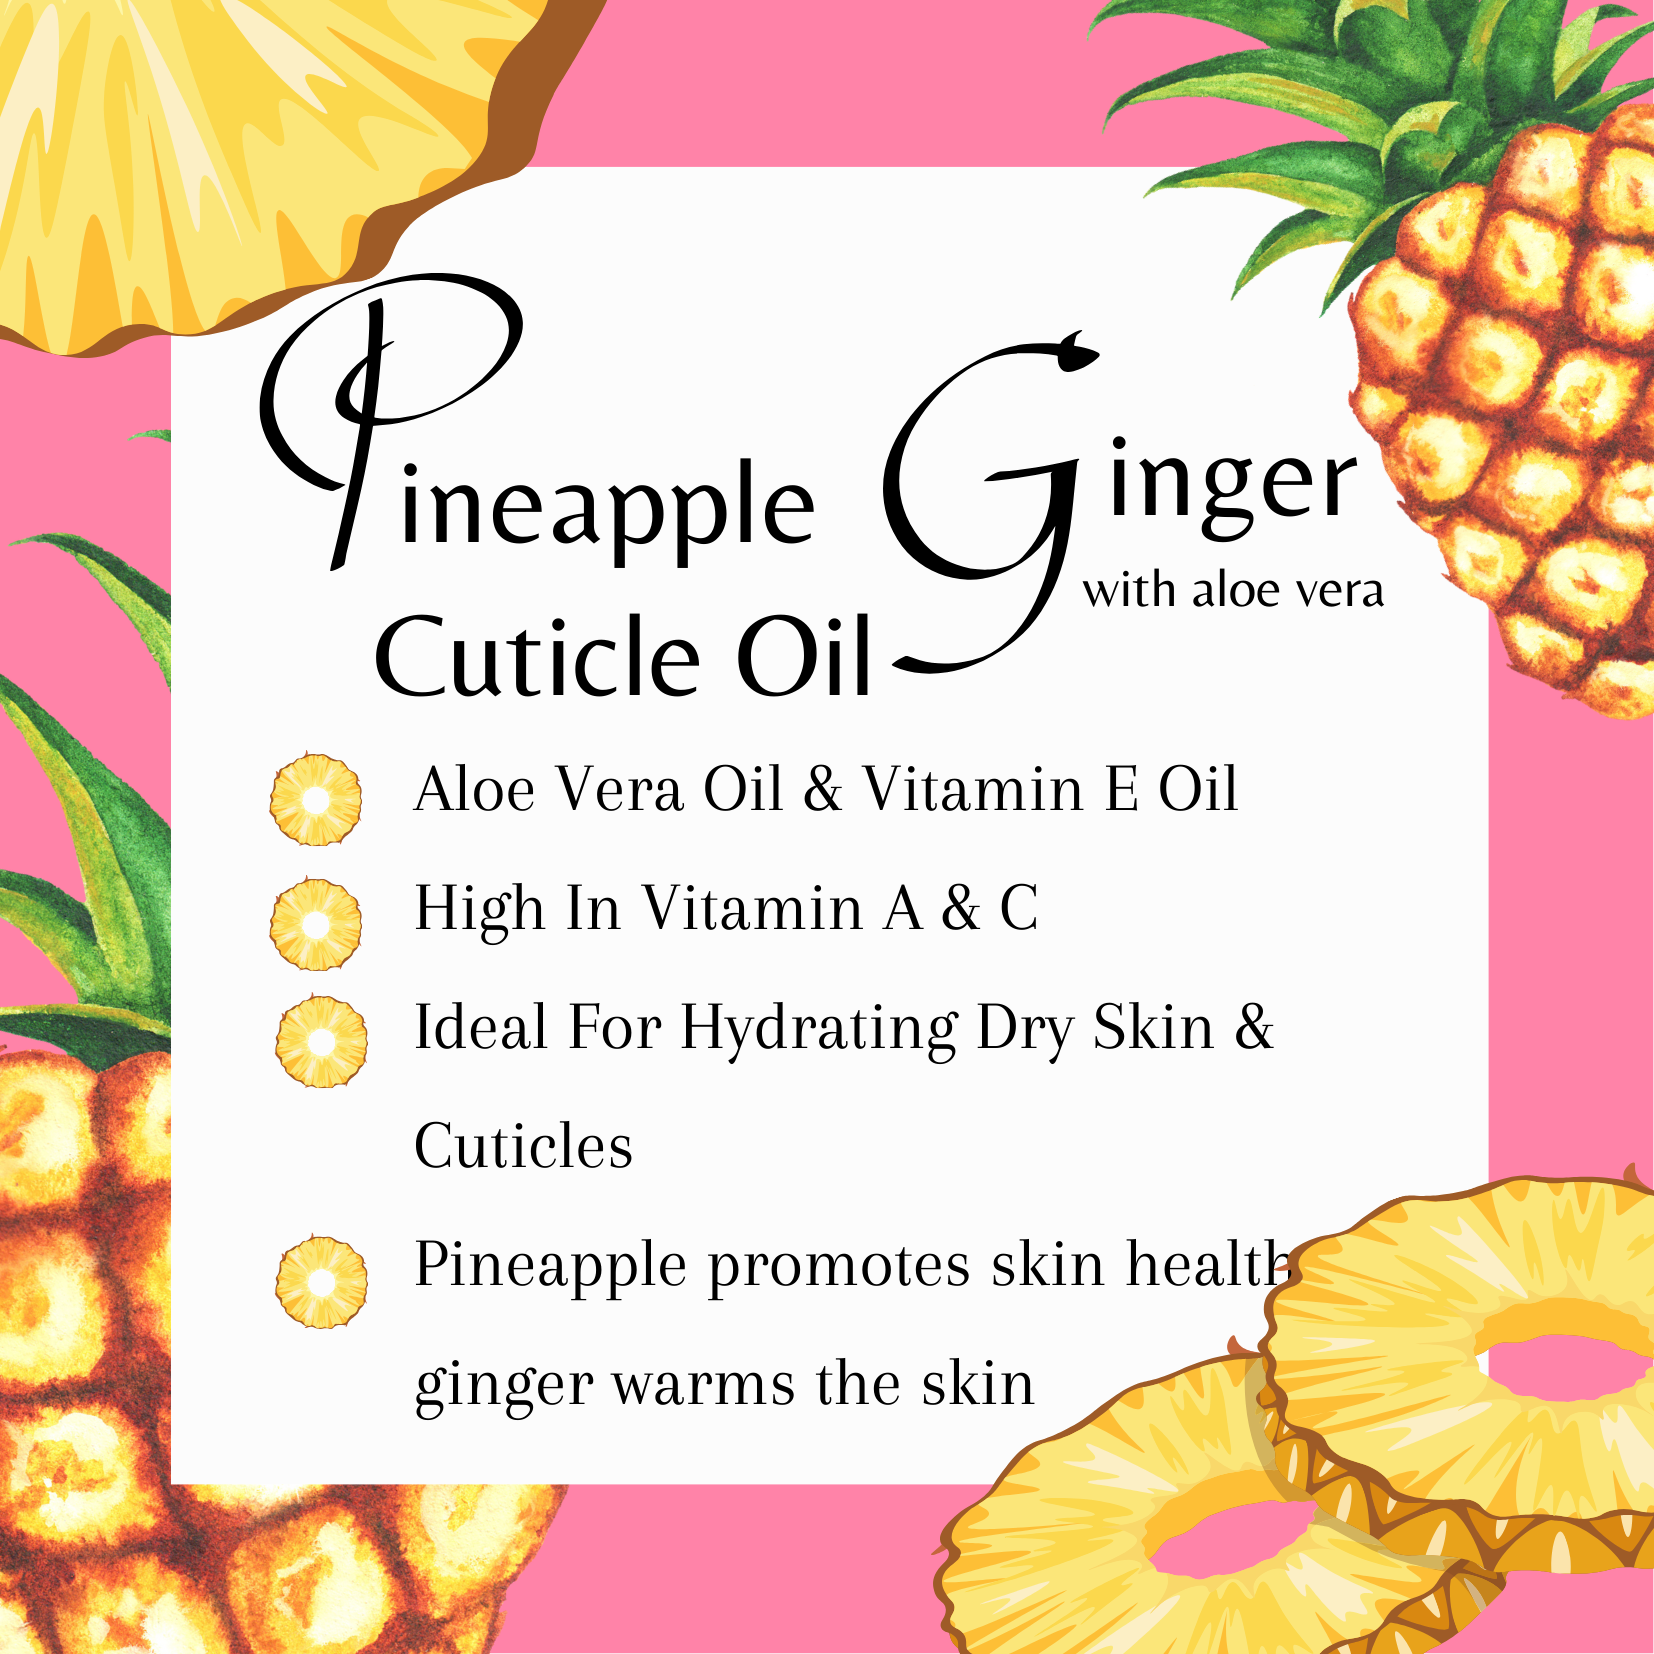 Pineapple Ginger Cuticle Oil